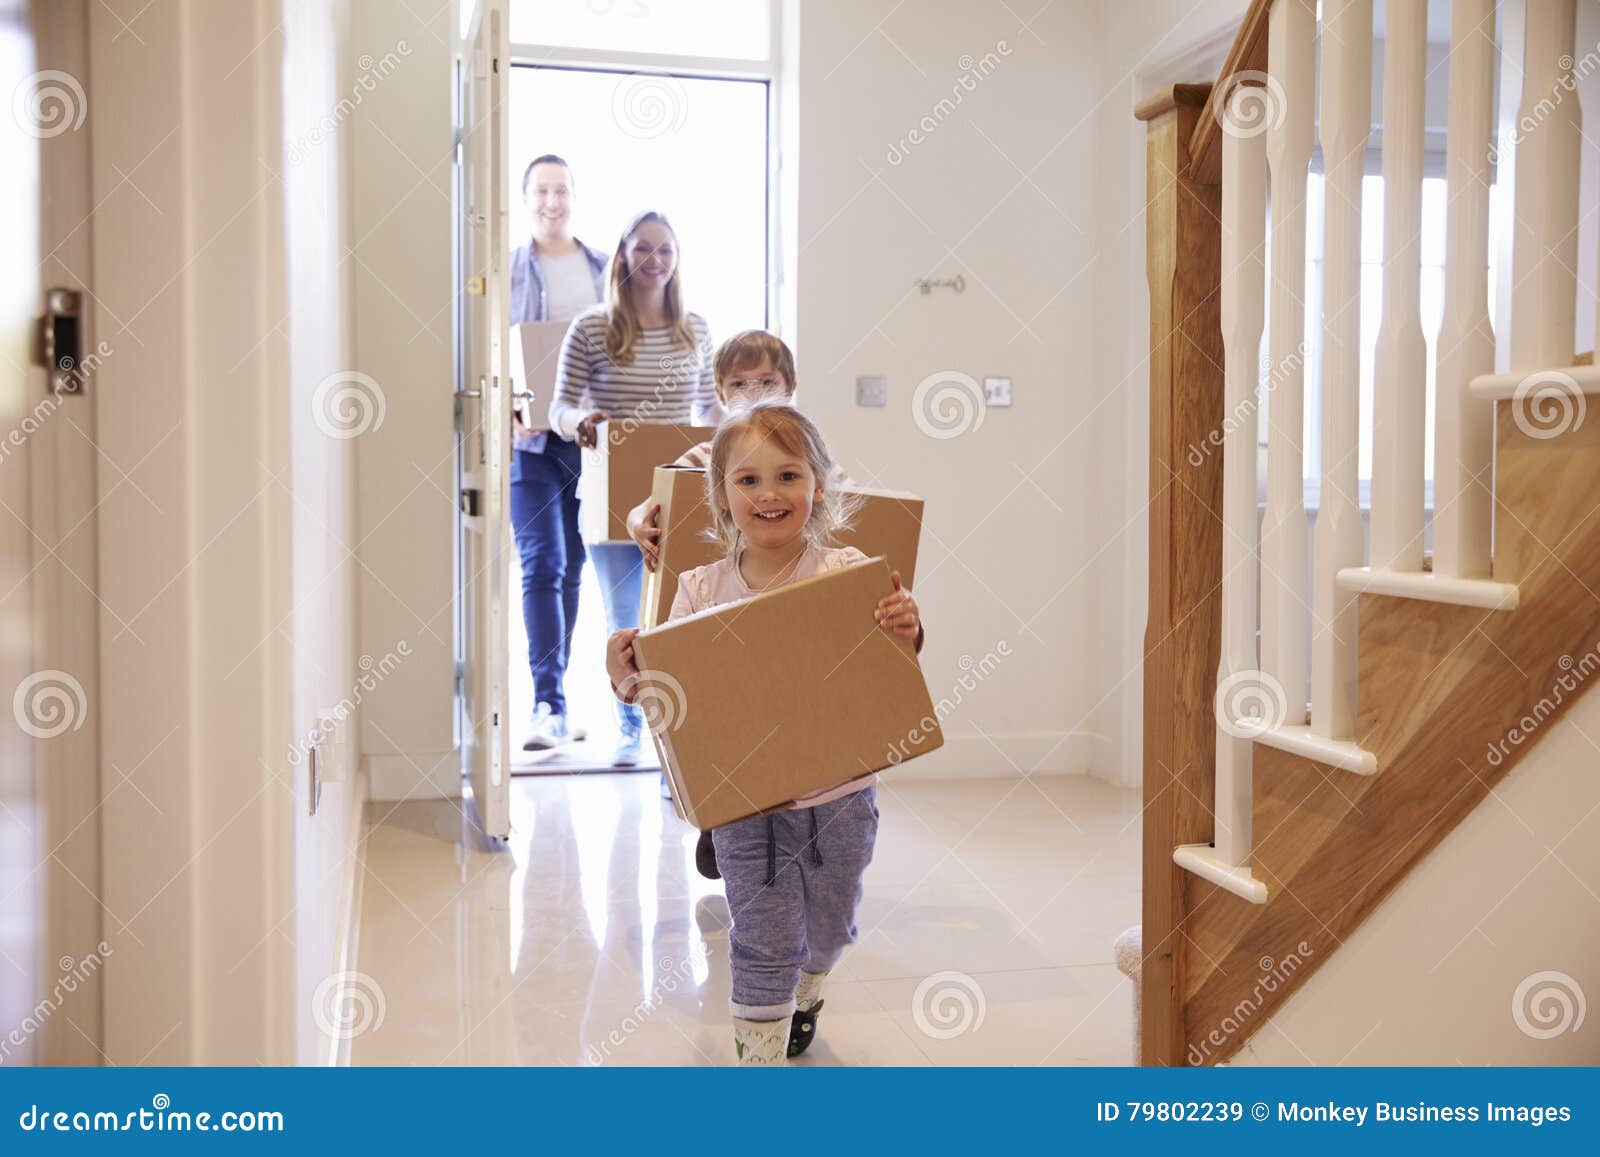 family carrying boxes into new home on moving day